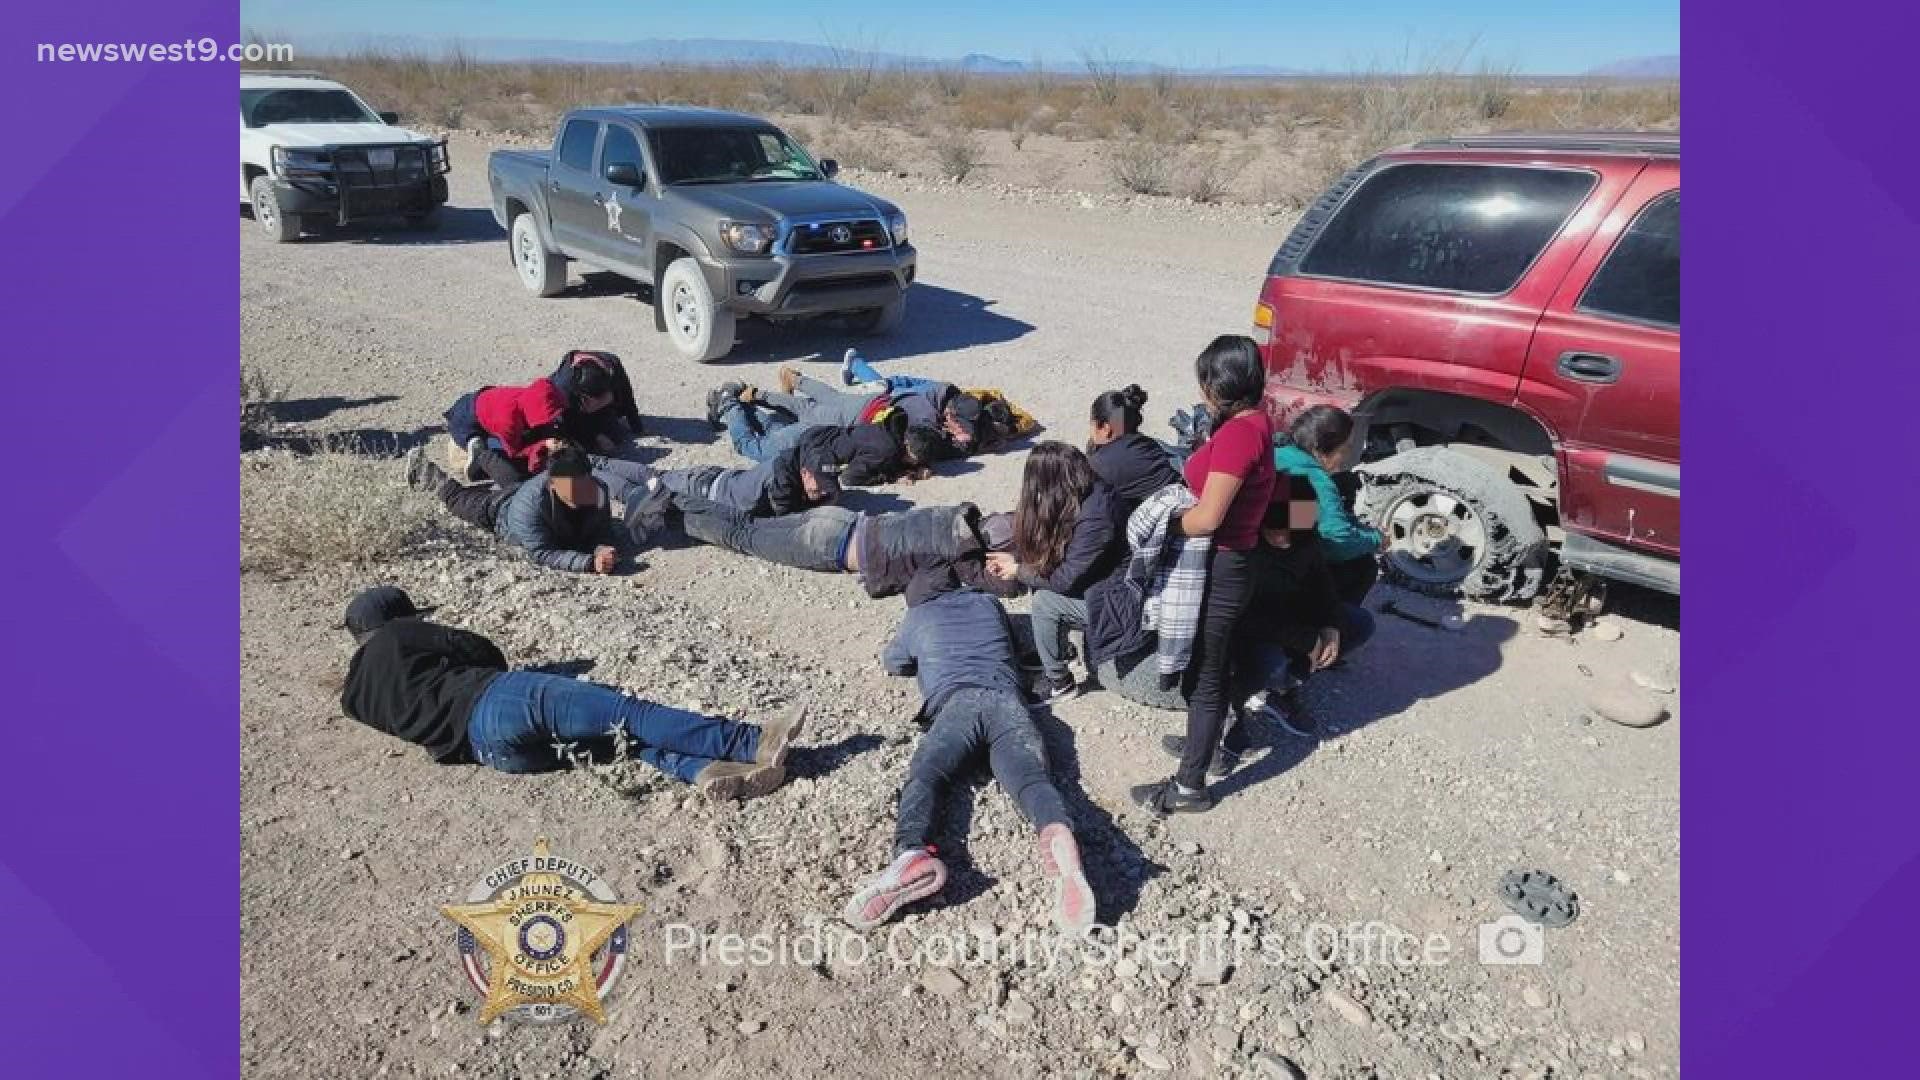 The driver of the group abandoned the individuals found by United States Border Patrol.